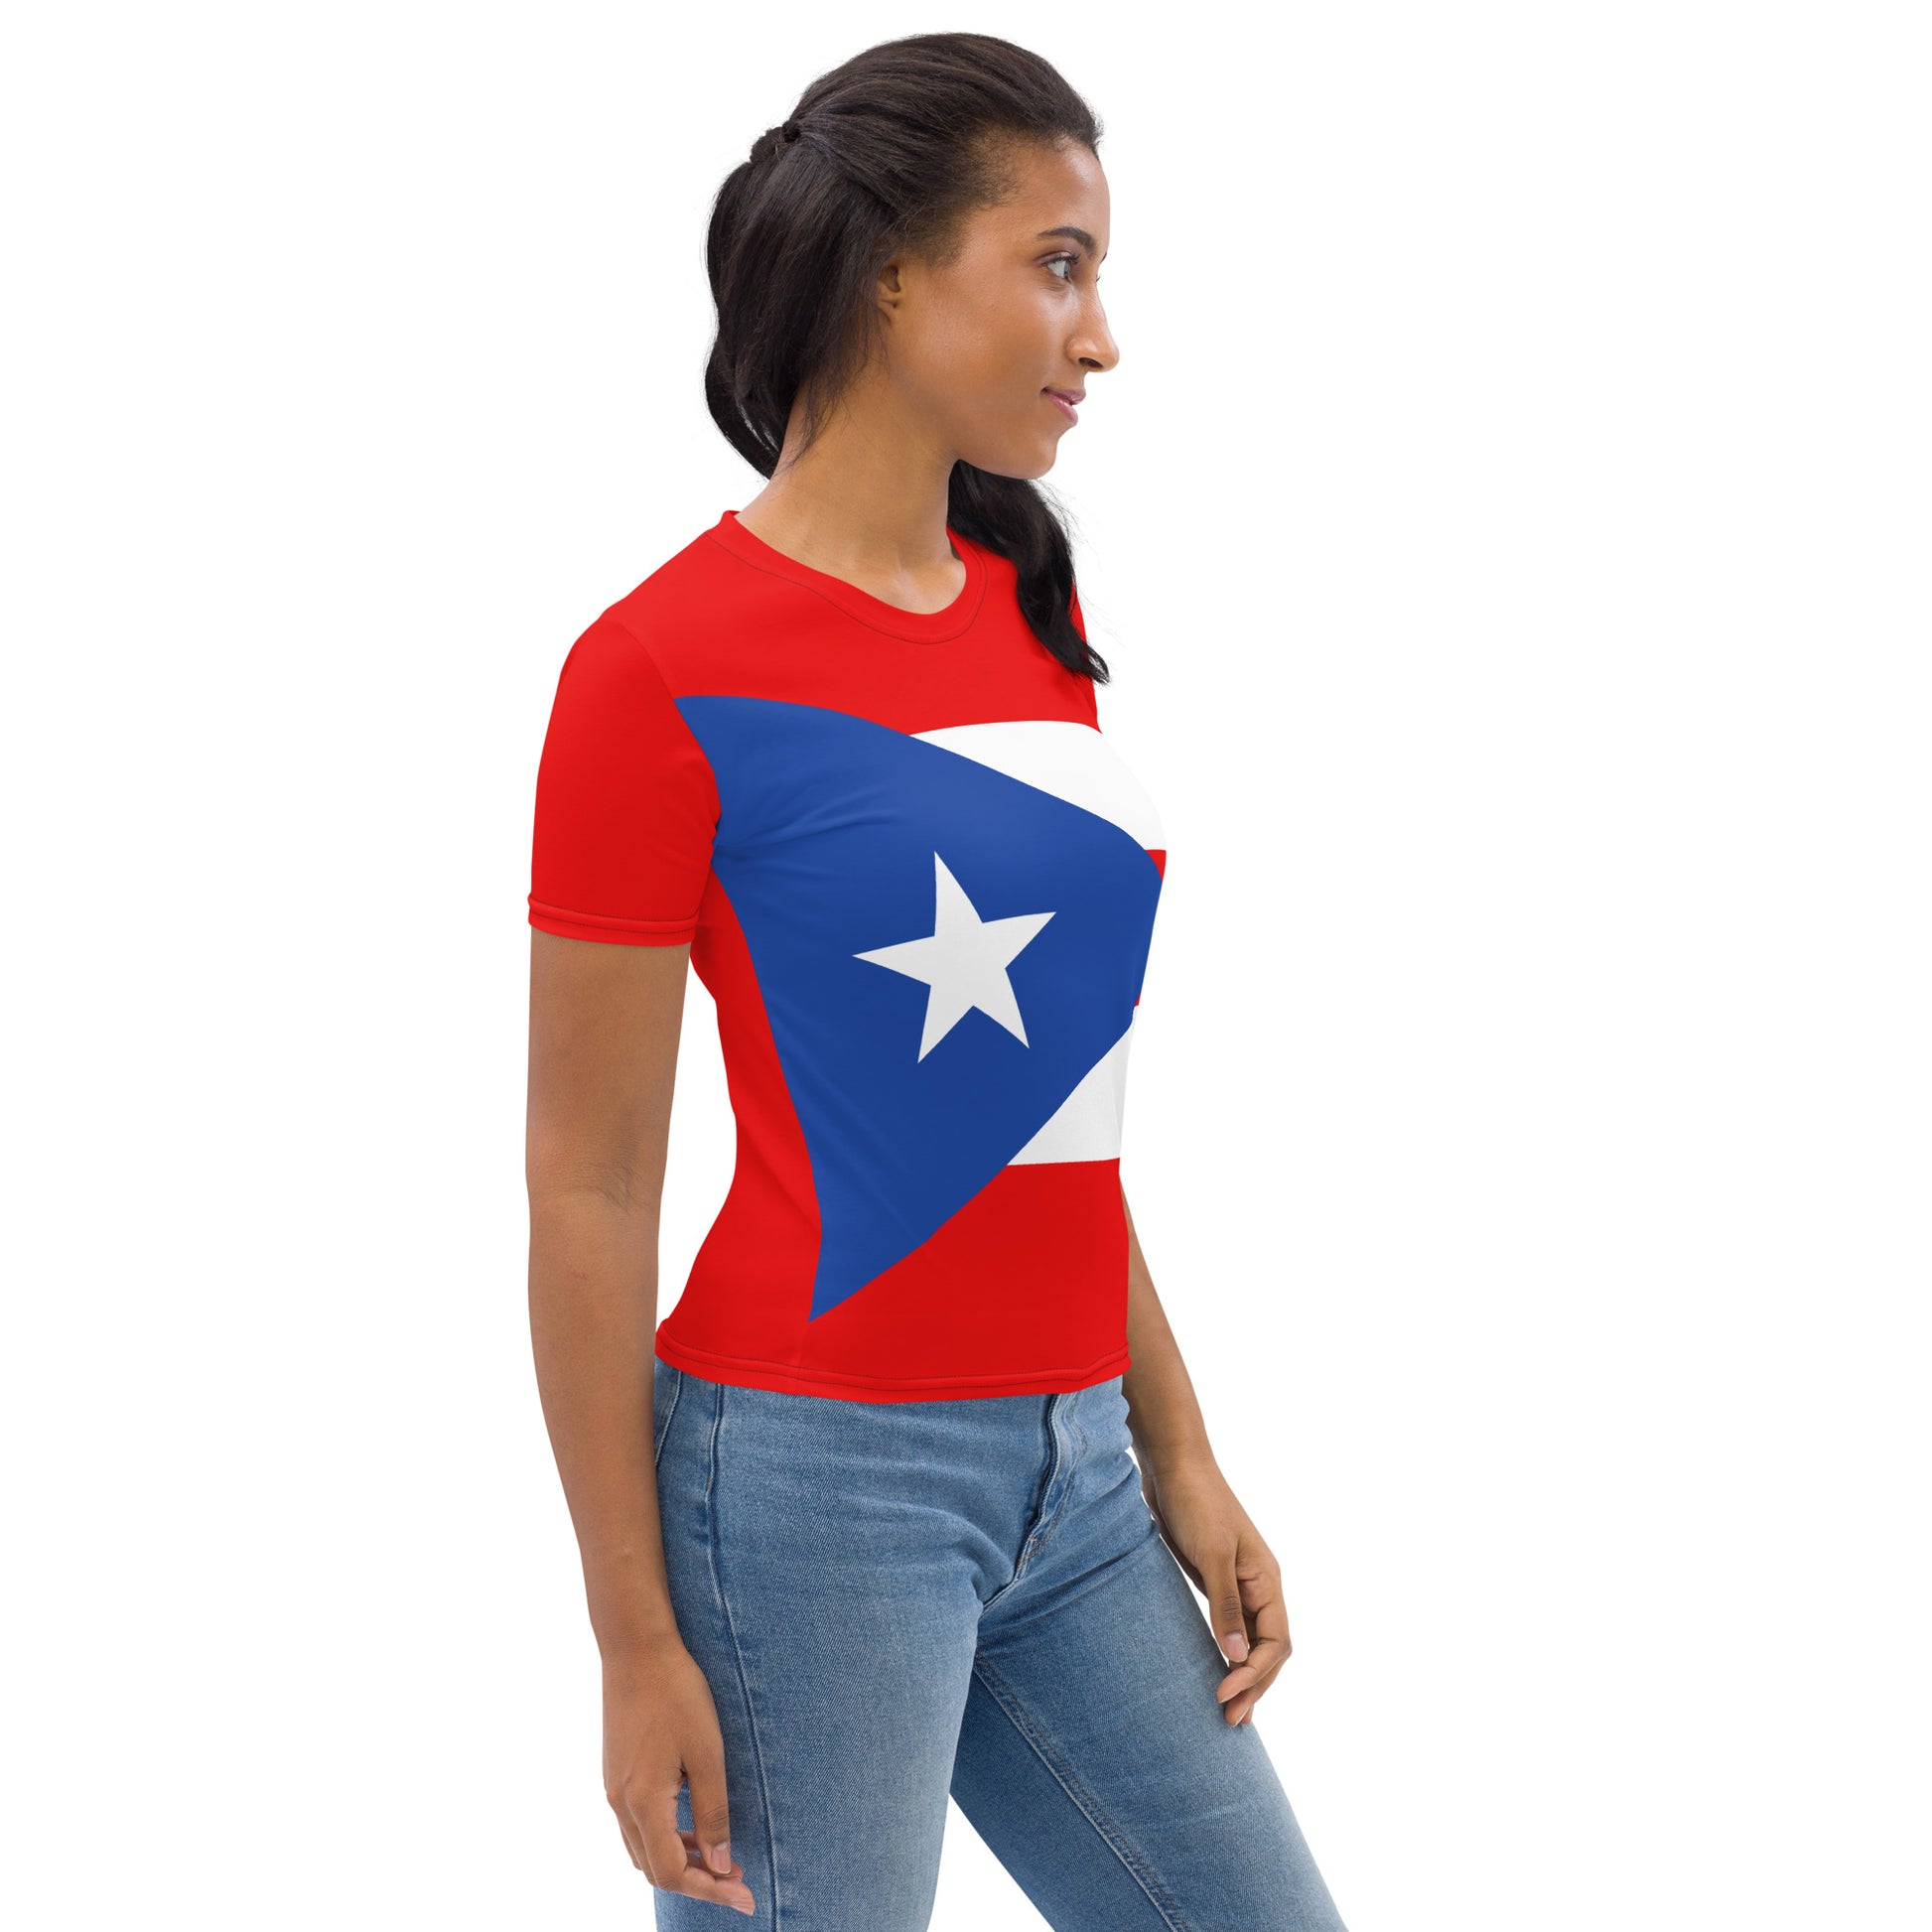 Puerto Rican Flag Shirt for Women - Patriotic Style